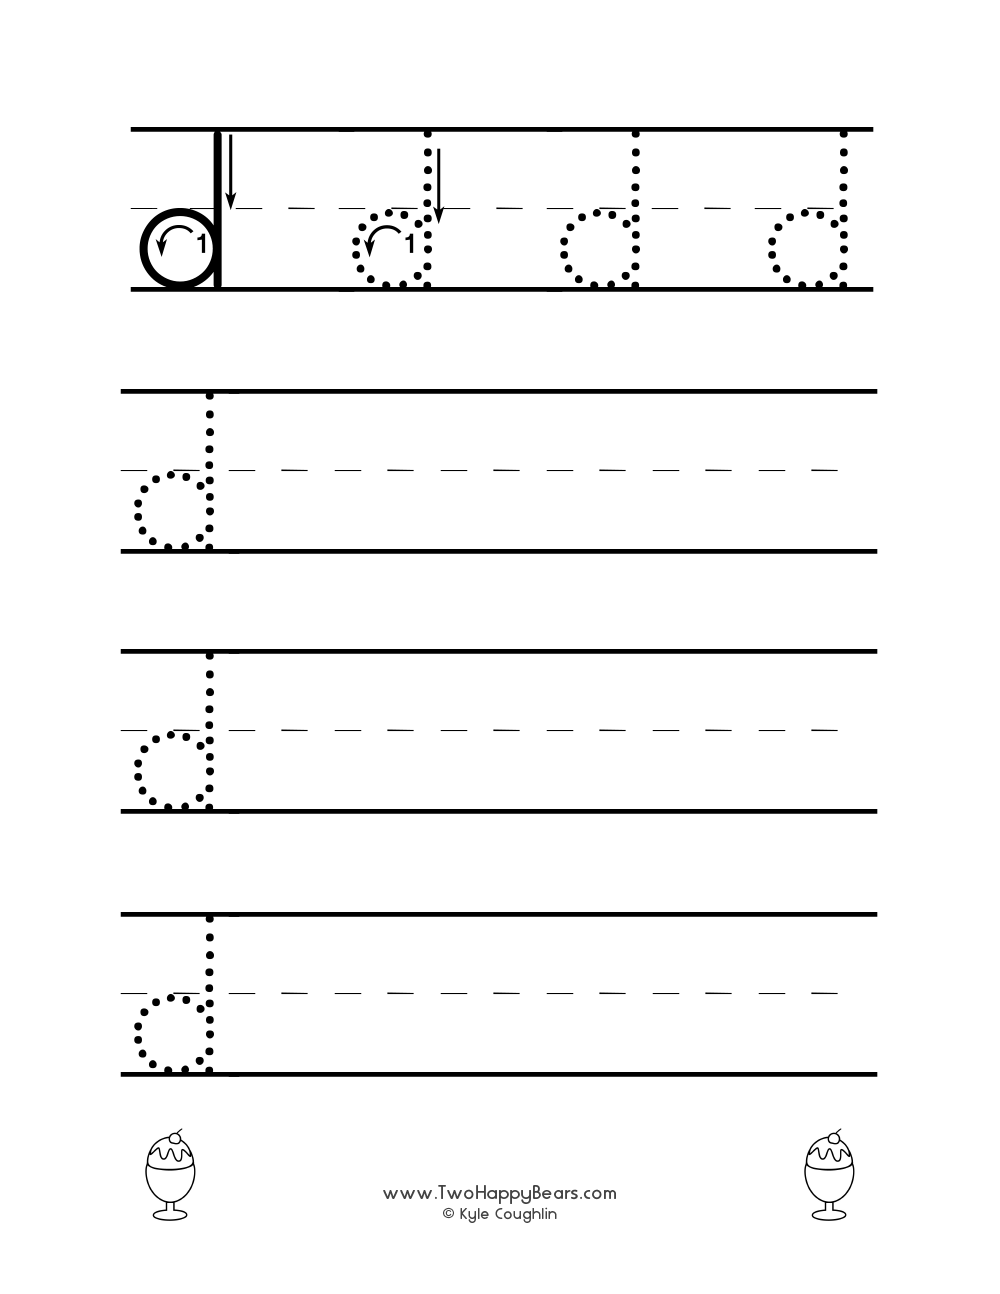 Lowercase letter D worksheet for tracing and drawing